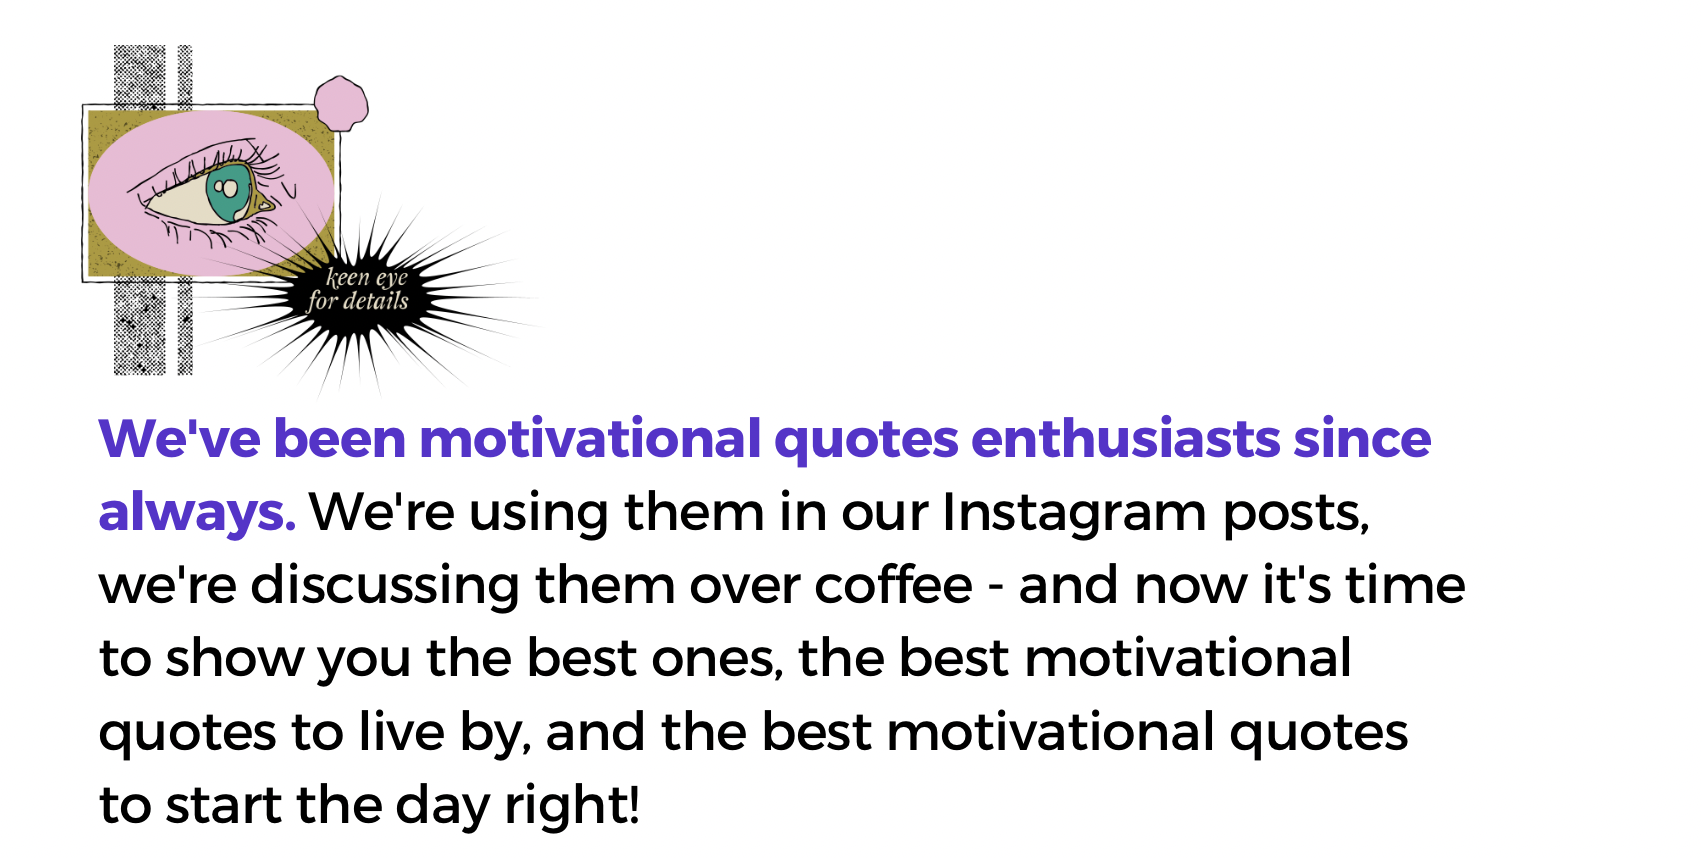 short quotes on motivation for you to inspire you - our best motivational quotes